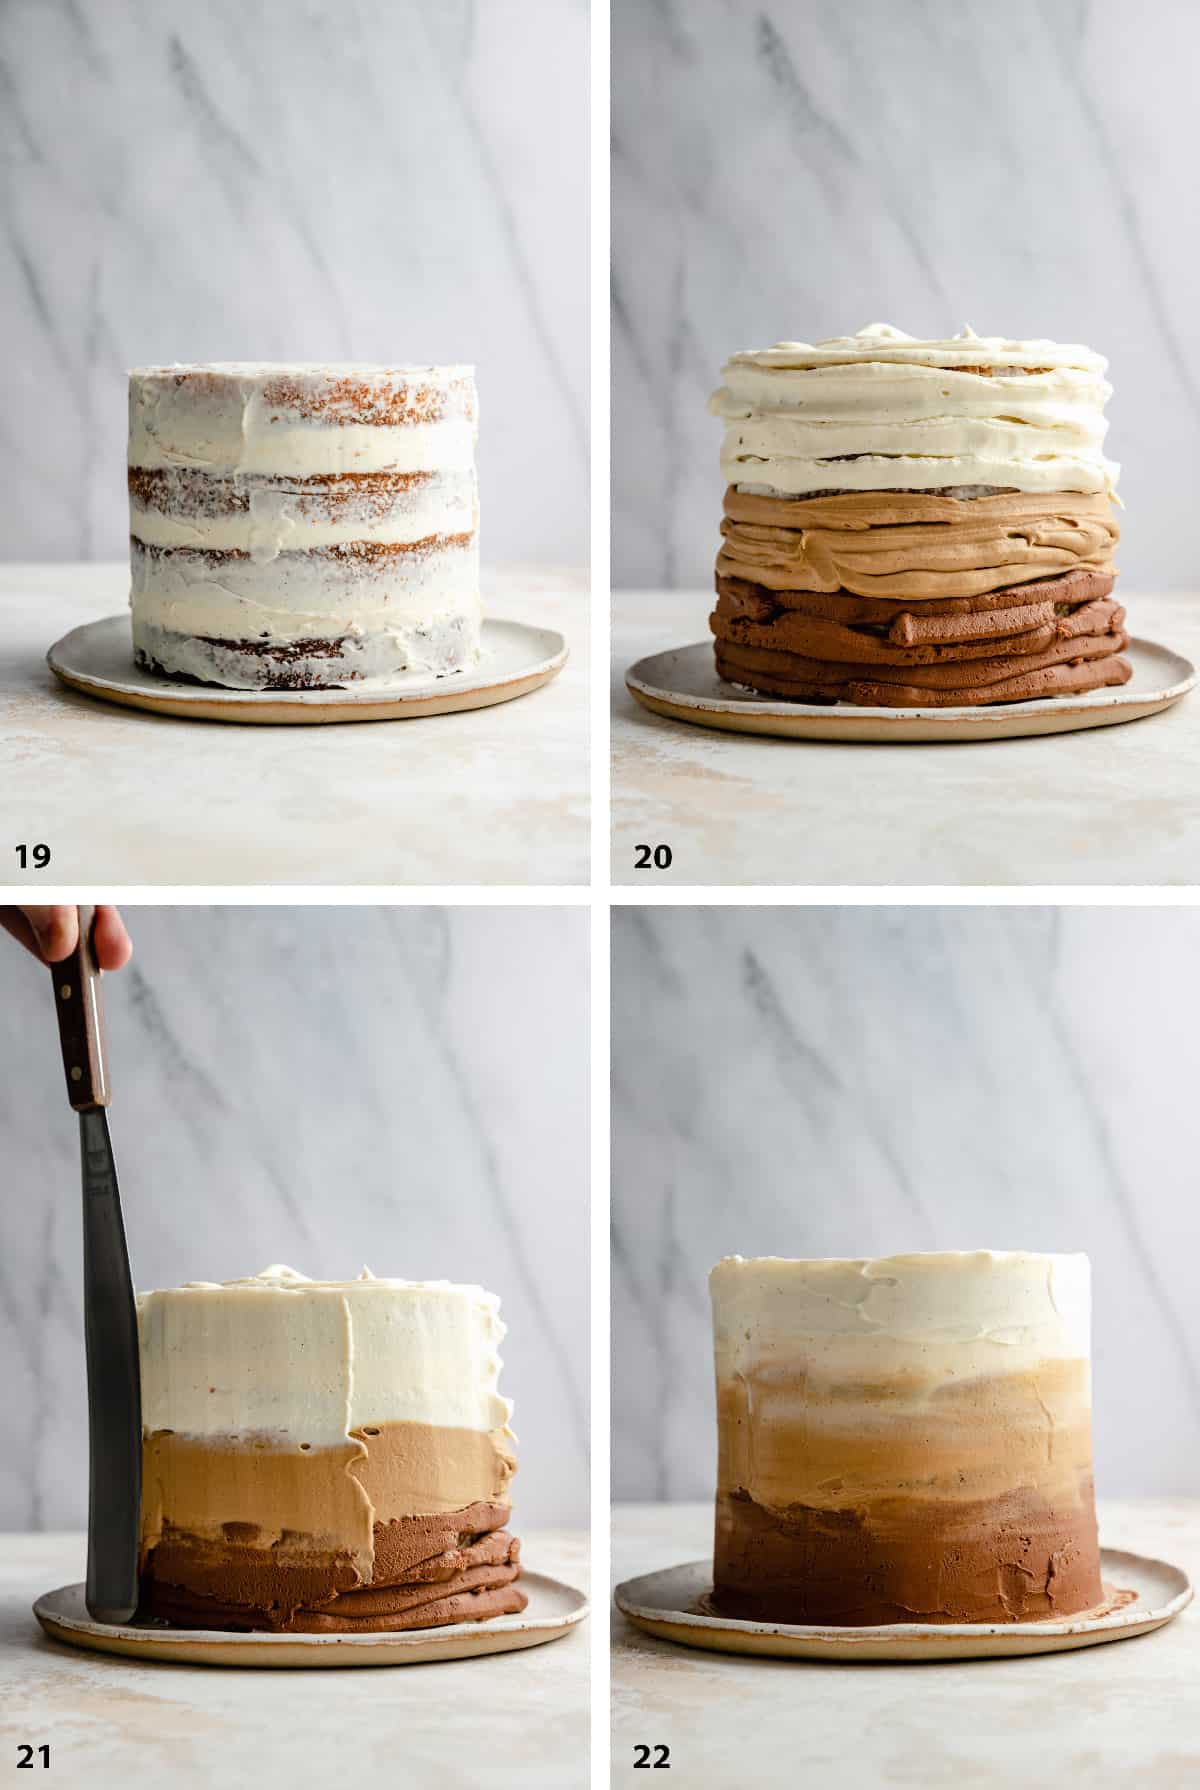 process of applying crumb layer then frosting with the ombre mascarpone frosting.